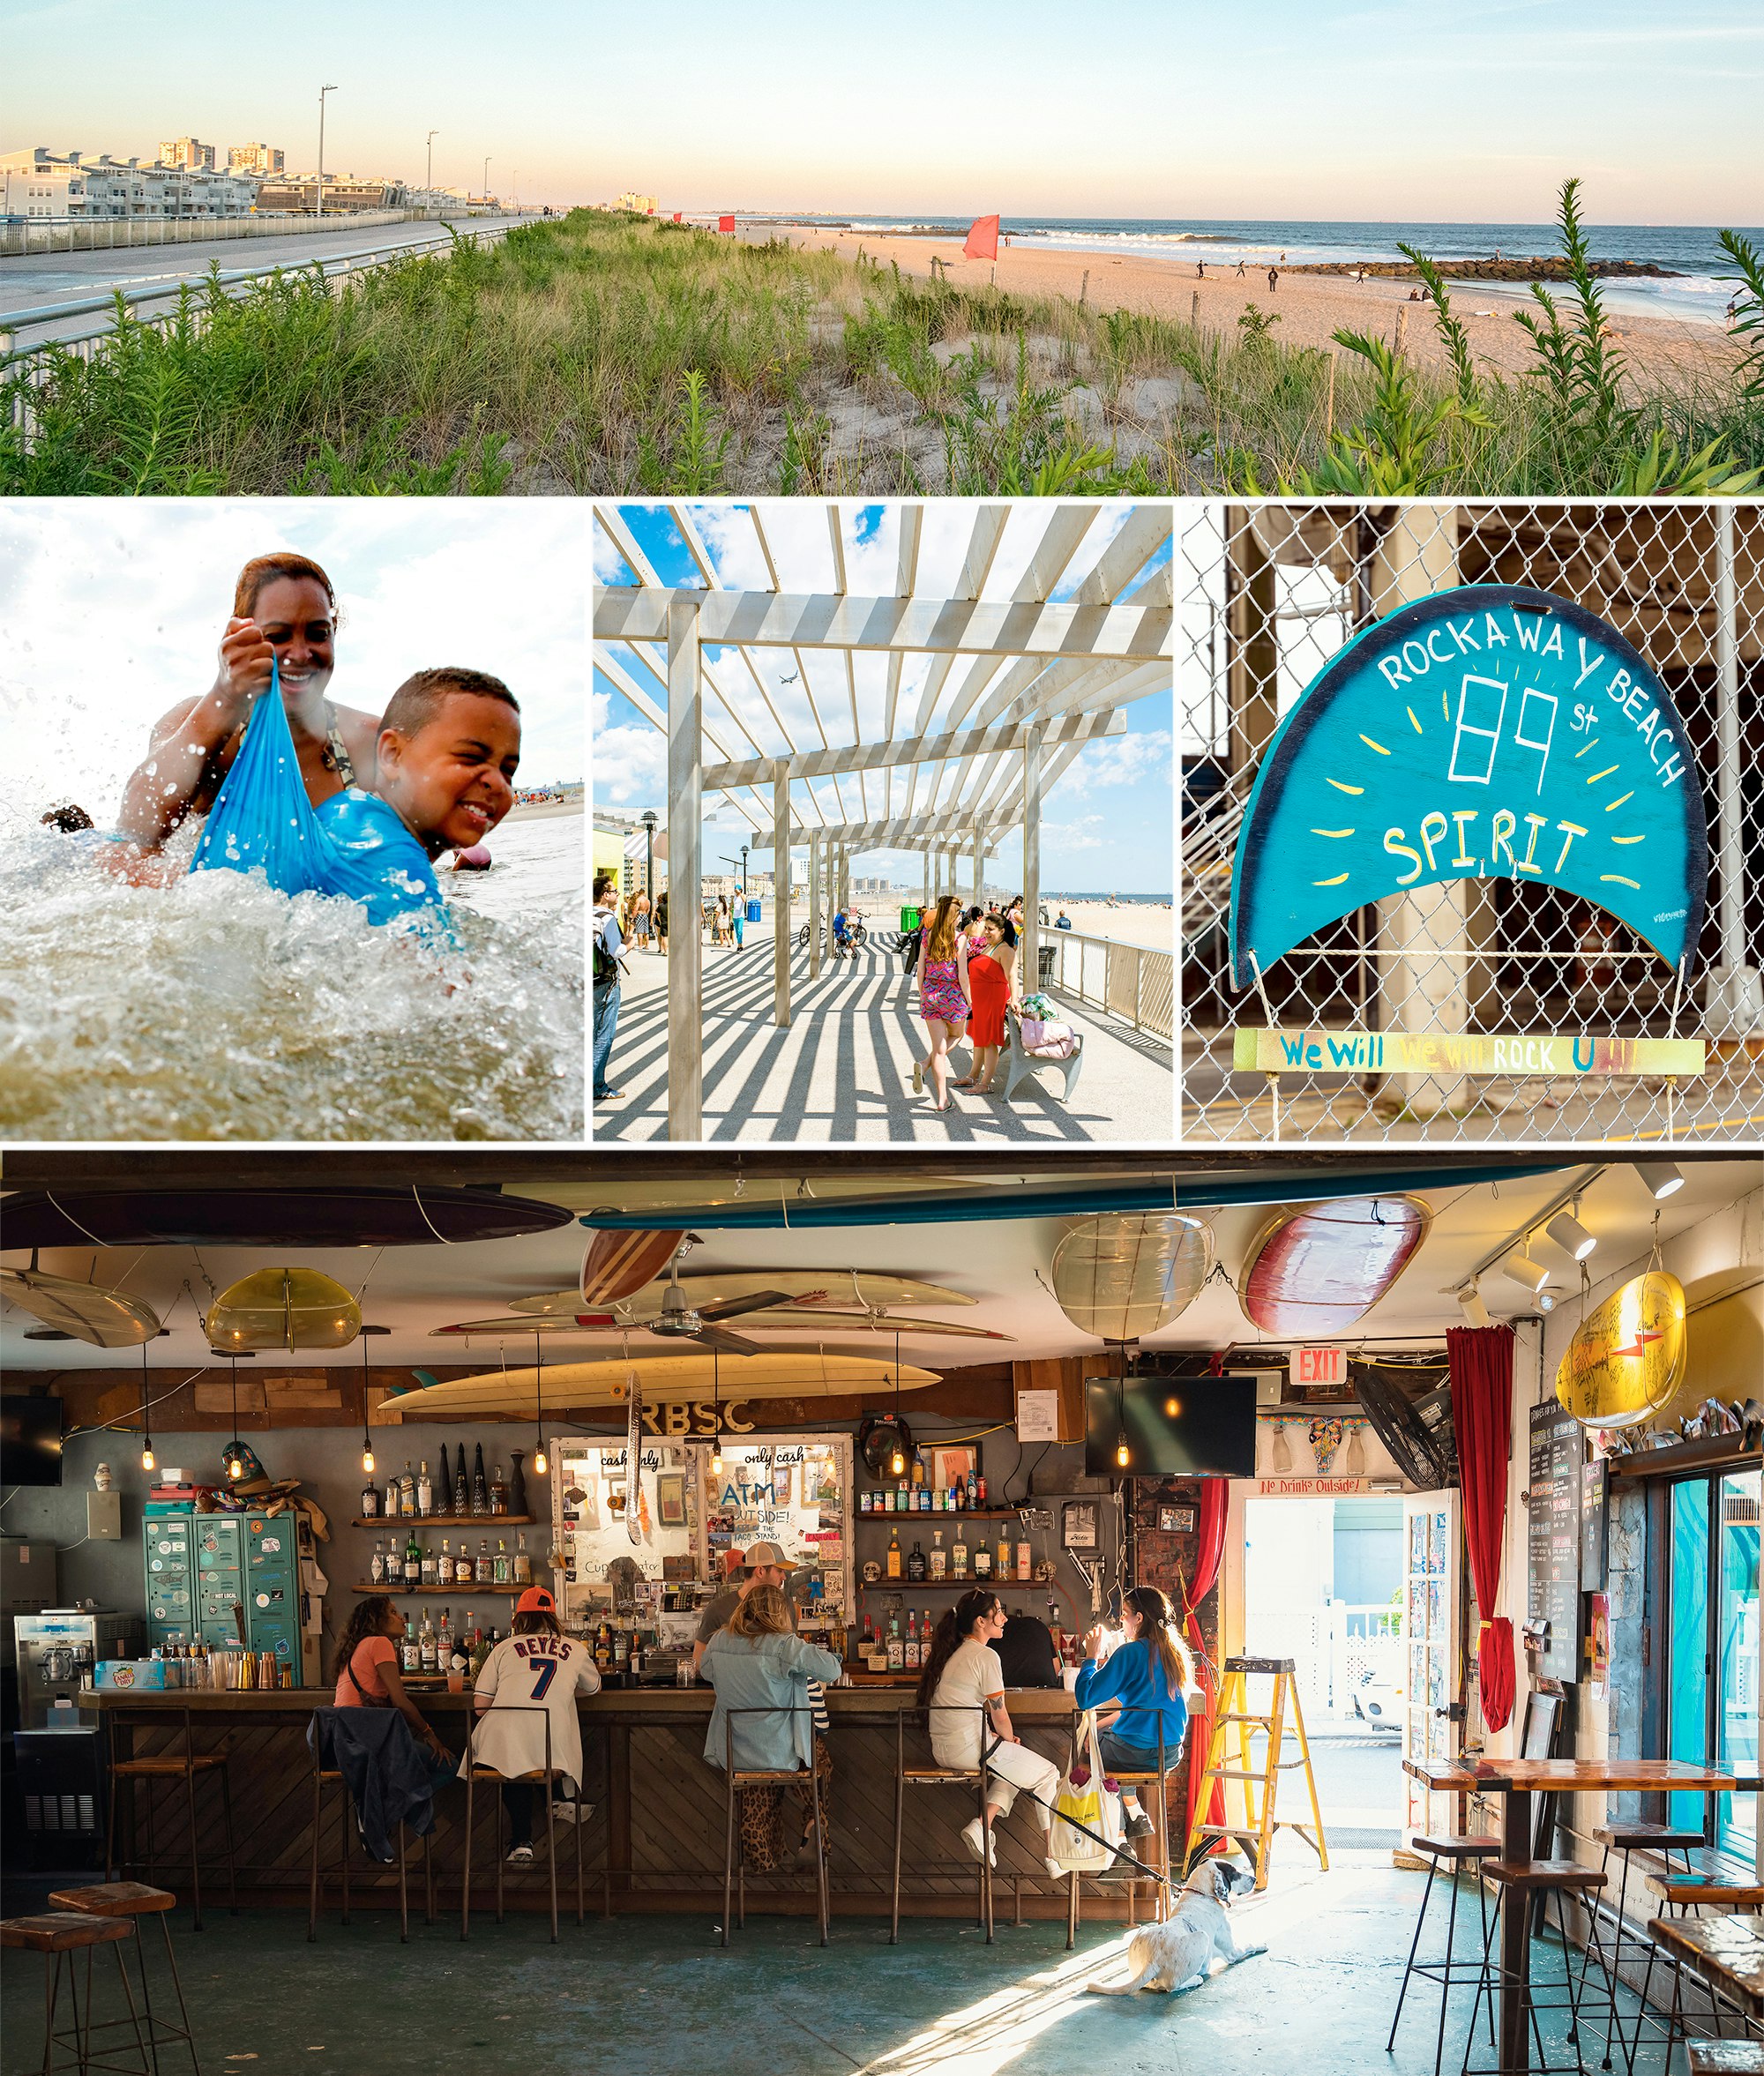 Scenes from Far Rockaway: the shoreline at sunset, a mother and son play in the ocean waves, shadows on the boardwalk, a sign at 89th street, and patrons at Rockaway Beach Surf Club bar and restaurant